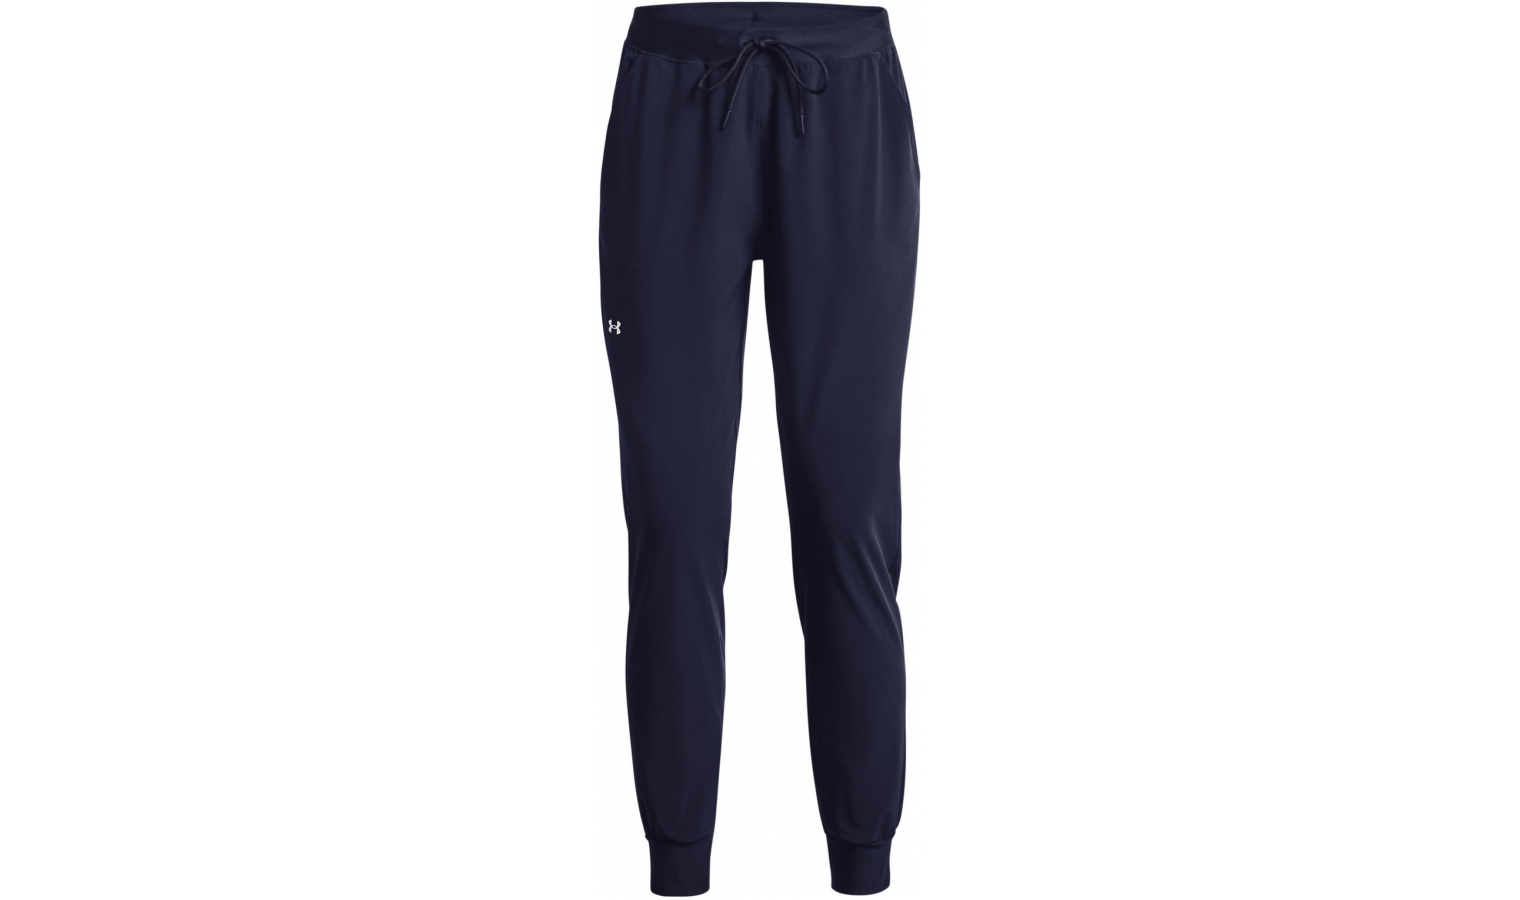 Womens sports pants Under Armour ARMOUR SPORT WOVEN PANT W blue